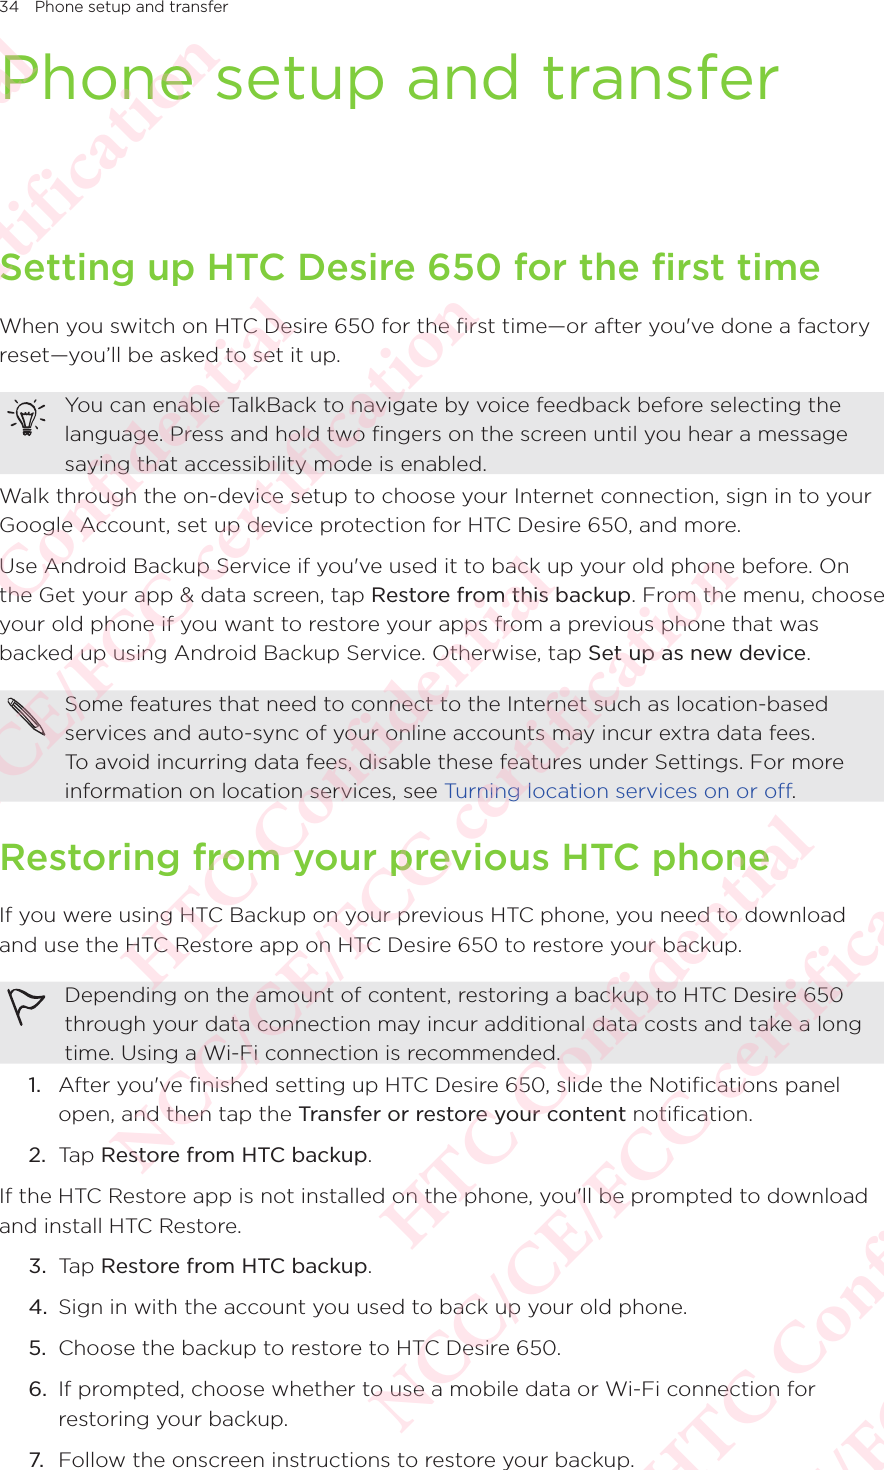 34 Phone setup and transferPhone setup and transferSetting up HTC Desire 650 for the first timeWhen you switch on HTC Desire 650 for the first time—or after you&apos;ve done a factory reset—you’ll be asked to set it up. You can enable TalkBack to navigate by voice feedback before selecting the language. Press and hold two fingers on the screen until you hear a message saying that accessibility mode is enabled. Walk through the on-device setup to choose your Internet connection, sign in to your Google Account, set up device protection for HTC Desire 650, and more. Use Android Backup Service if you&apos;ve used it to back up your old phone before. On the Get your app &amp; data screen, tap Restore from this backup. From the menu, choose your old phone if you want to restore your apps from a previous phone that was backed up using Android Backup Service. Otherwise, tap Set up as new device. Some features that need to connect to the Internet such as location-based services and auto-sync of your online accounts may incur extra data fees. To avoid incurring data fees, disable these features under Settings. For more information on location services, see Turning location services on or off. Restoring from your previous HTC phoneIf you were using HTC Backup on your previous HTC phone, you need to download and use the HTC Restore app on HTC Desire 650 to restore your backup. Depending on the amount of content, restoring a backup to HTC Desire 650 through your data connection may incur additional data costs and take a long time. Using a Wi-Fi connection is recommended. 1.  After you&apos;ve finished setting up HTC Desire 650, slide the Notifications panel open, and then tap the Transfer or restore your content notification.2.  Tap Restore from HTC backup.If the HTC Restore app is not installed on the phone, you&apos;ll be prompted to download and install HTC Restore.3.  Tap Restore from HTC backup.4.  Sign in with the account you used to back up your old phone.5.  Choose the backup to restore to HTC Desire 650. 6.  If prompted, choose whether to use a mobile data or Wi-Fi connection for restoring your backup. 7.  Follow the onscreen instructions to restore your backup. HTC Confidential NCC/CE/FCC certification  HTC Confidential NCC/CE/FCC certification  HTC Confidential NCC/CE/FCC certification  HTC Confidential NCC/CE/FCC certification  HTC Confidential NCC/CE/FCC certification